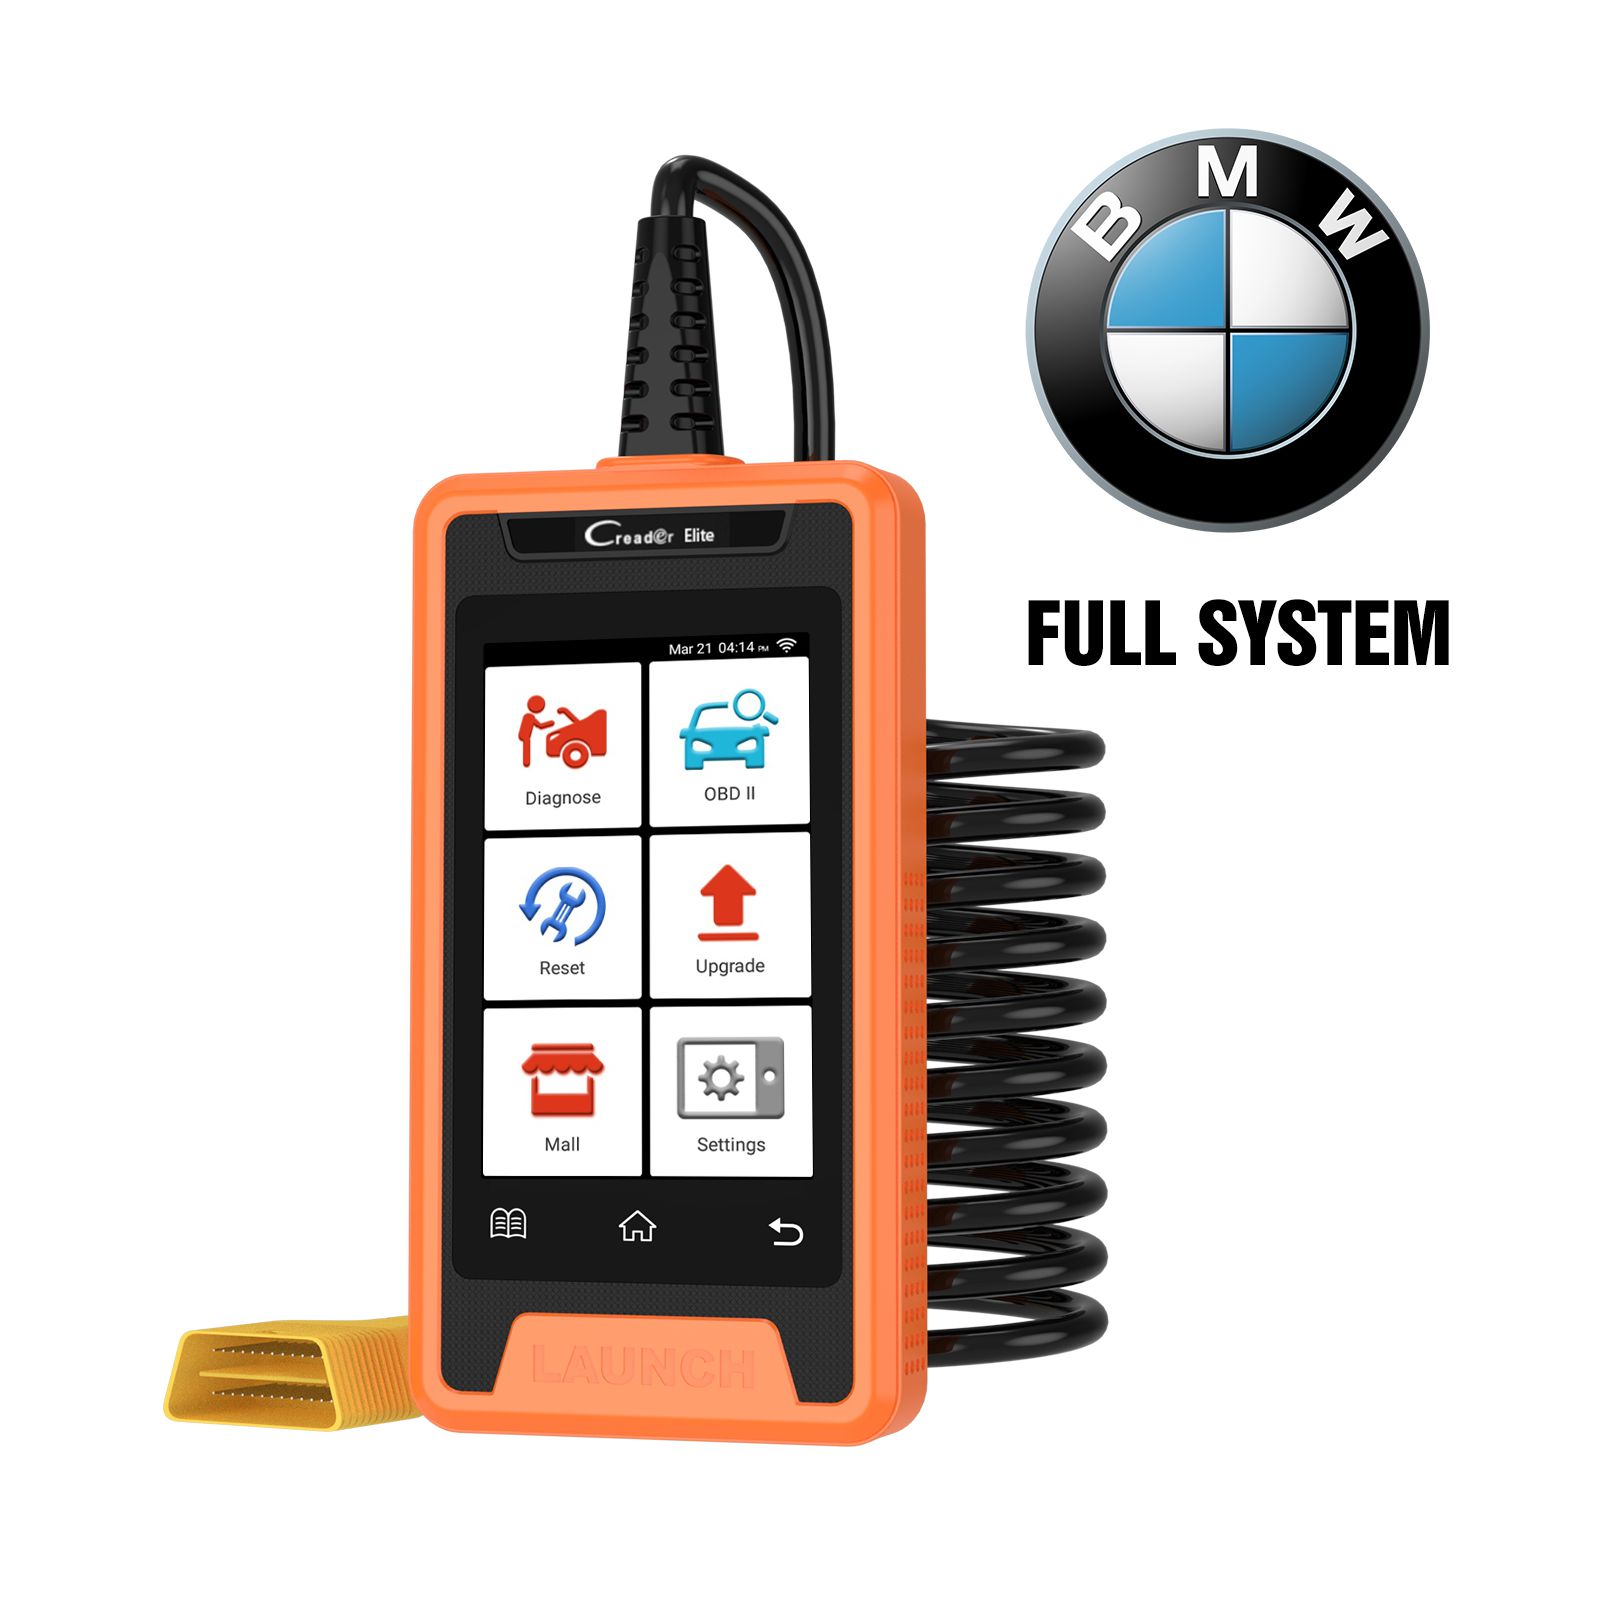 Newest Launch Creader Elite For BMW Diagnostic Scan Tool with Full OBD Functions